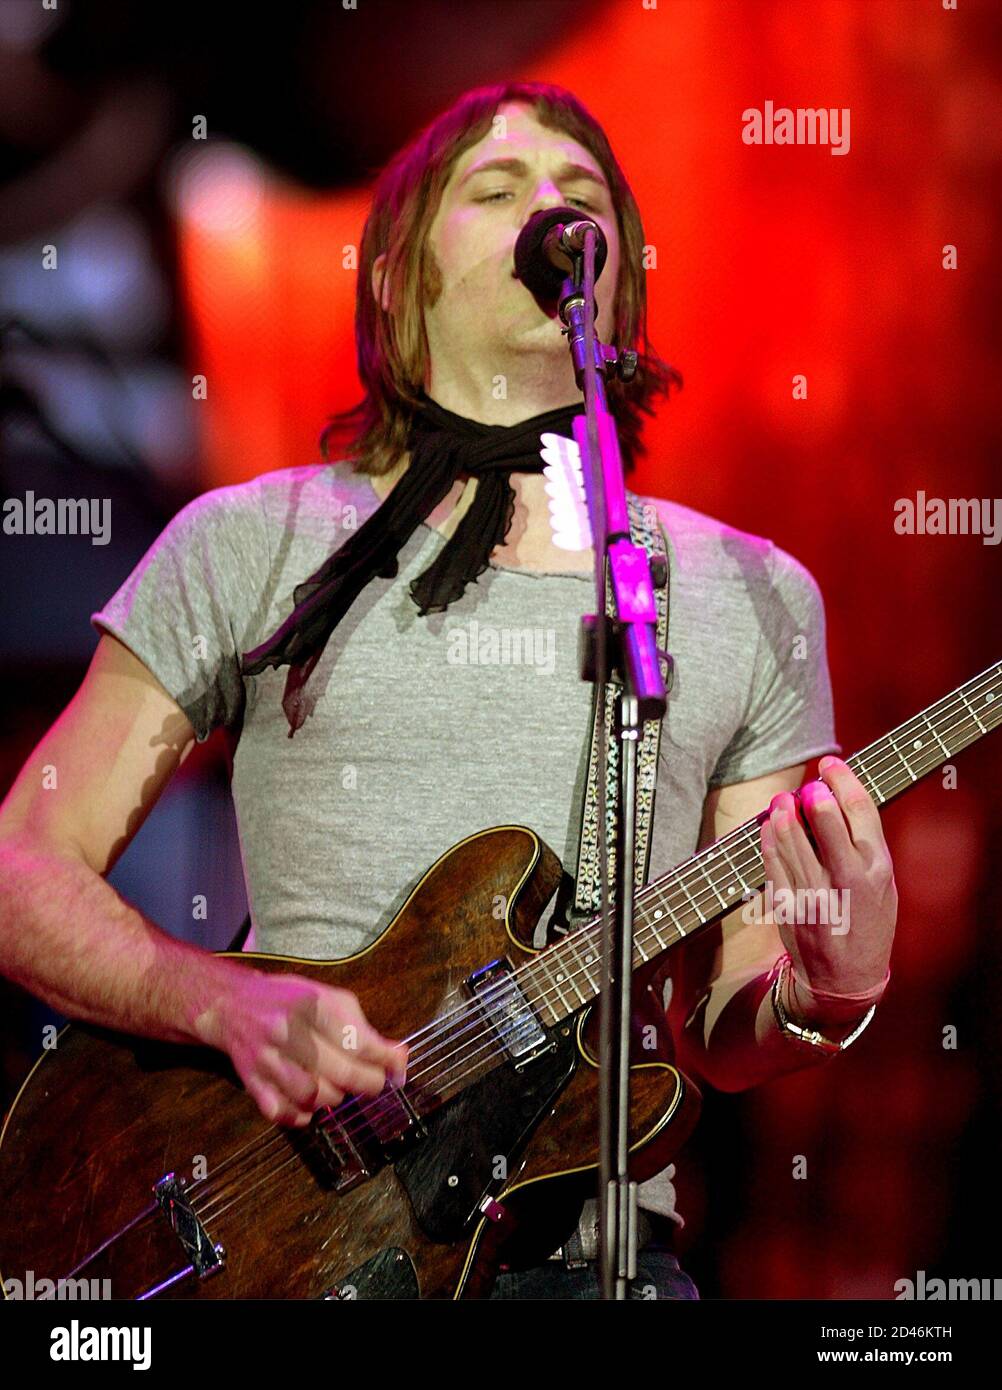 US rock band King of Leon singer Caled performs in the Rock in Rio festival  held in Lisbon May 30, 2004. The Rock in Rio Festival started Friday night  and will feature